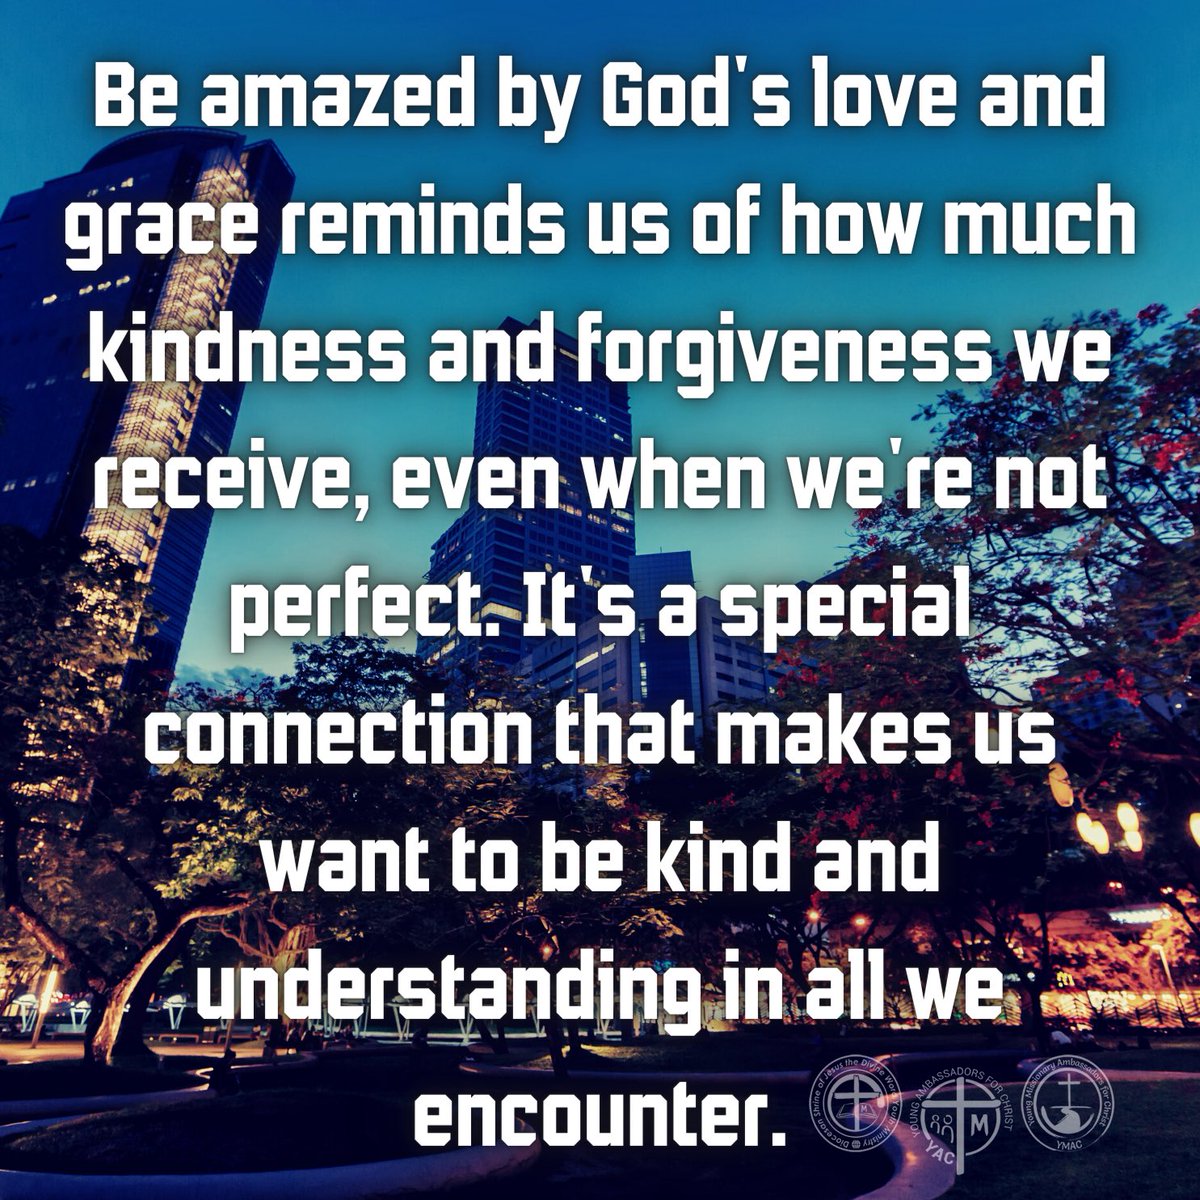 Be amazed by God's love and grace reminds us of how much kindness and forgiveness we receive, even when we're not perfect. 

#GodsLoveAndGrace #InAwe 
#GratefulHeart #DivineKindness #UnconditionalLove #YAC #YMAC #SYM #SVDyouth #ShrineYouth